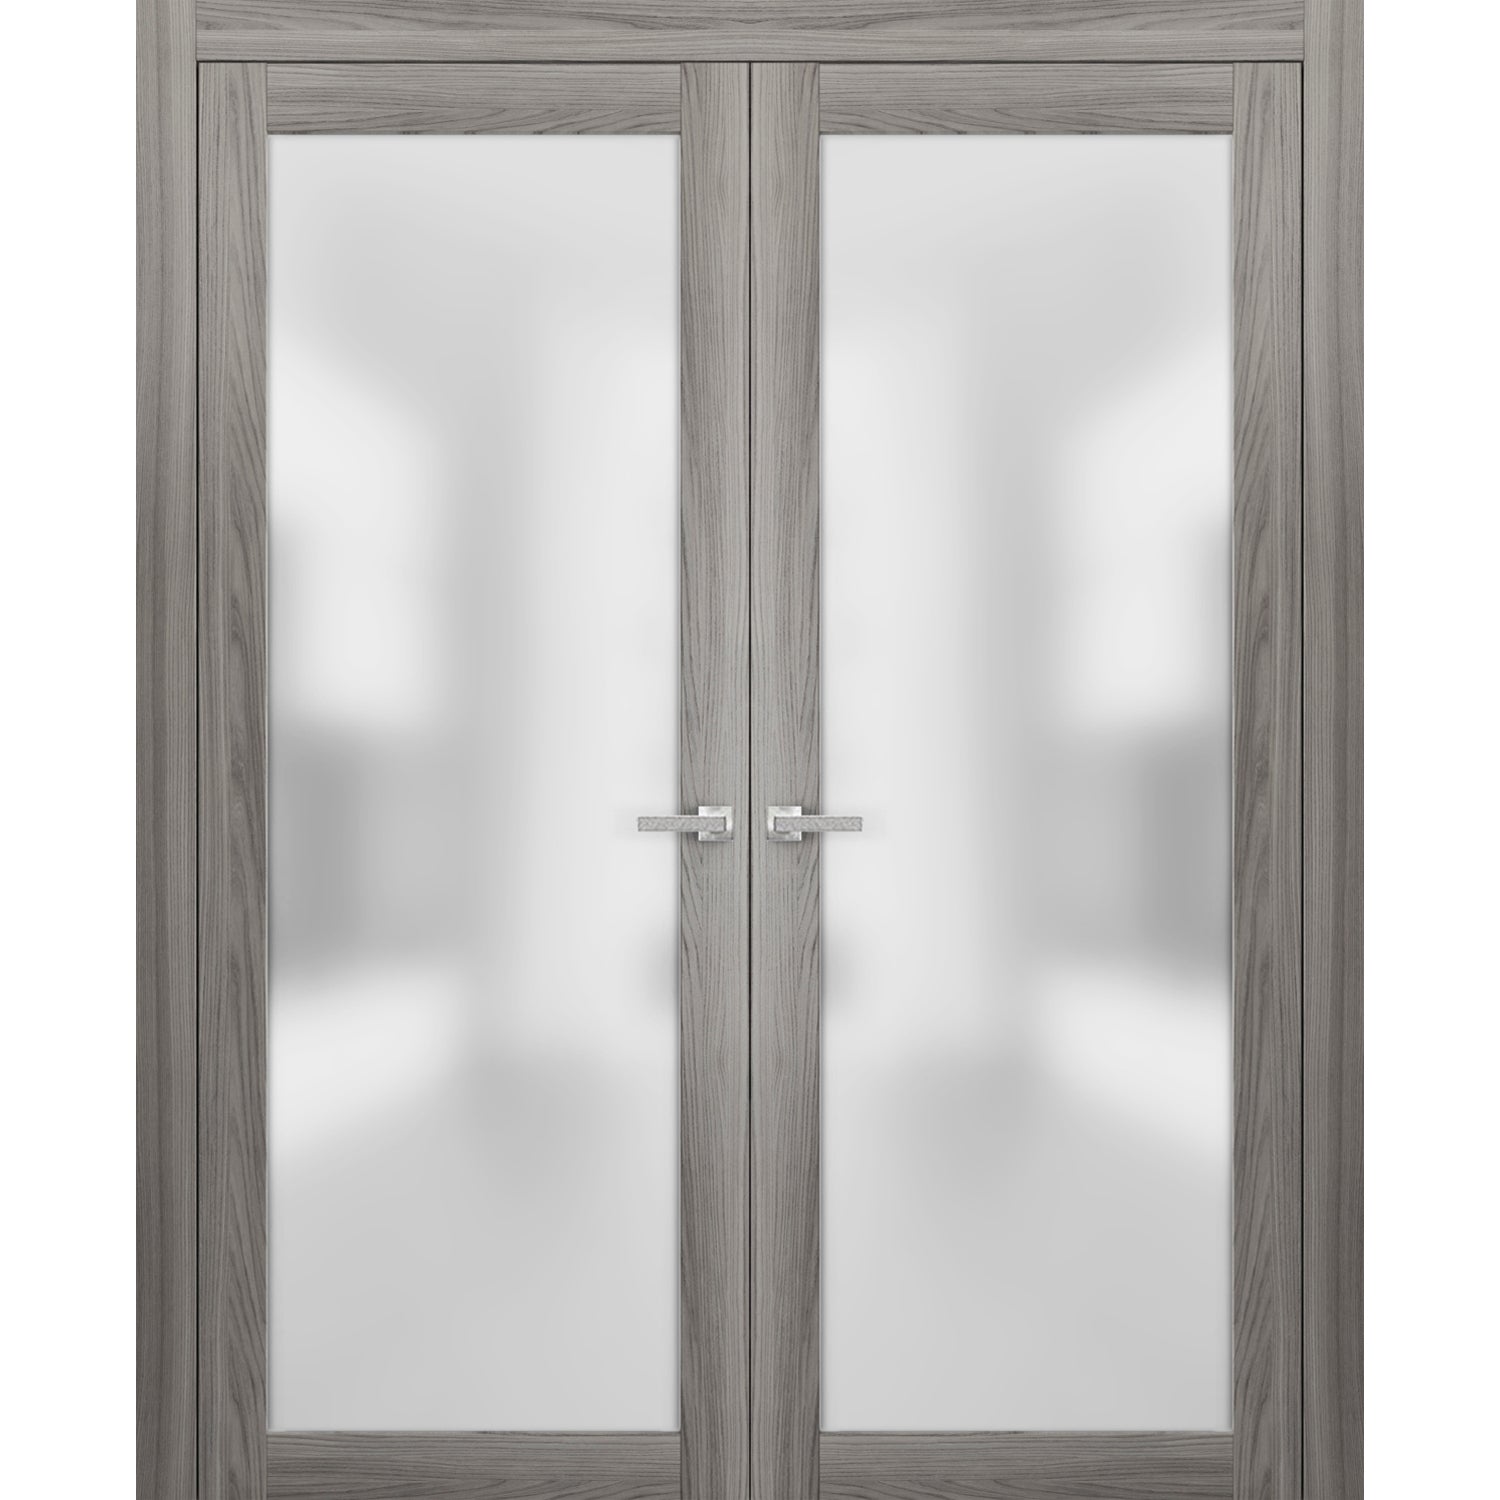 SARTODOORS French Frosted Glass Glass Doors 48 x 84 | Planum 2102 Ginger Ash | Frames Satin Nickel Hardware | Pre-hung Pine Doors 